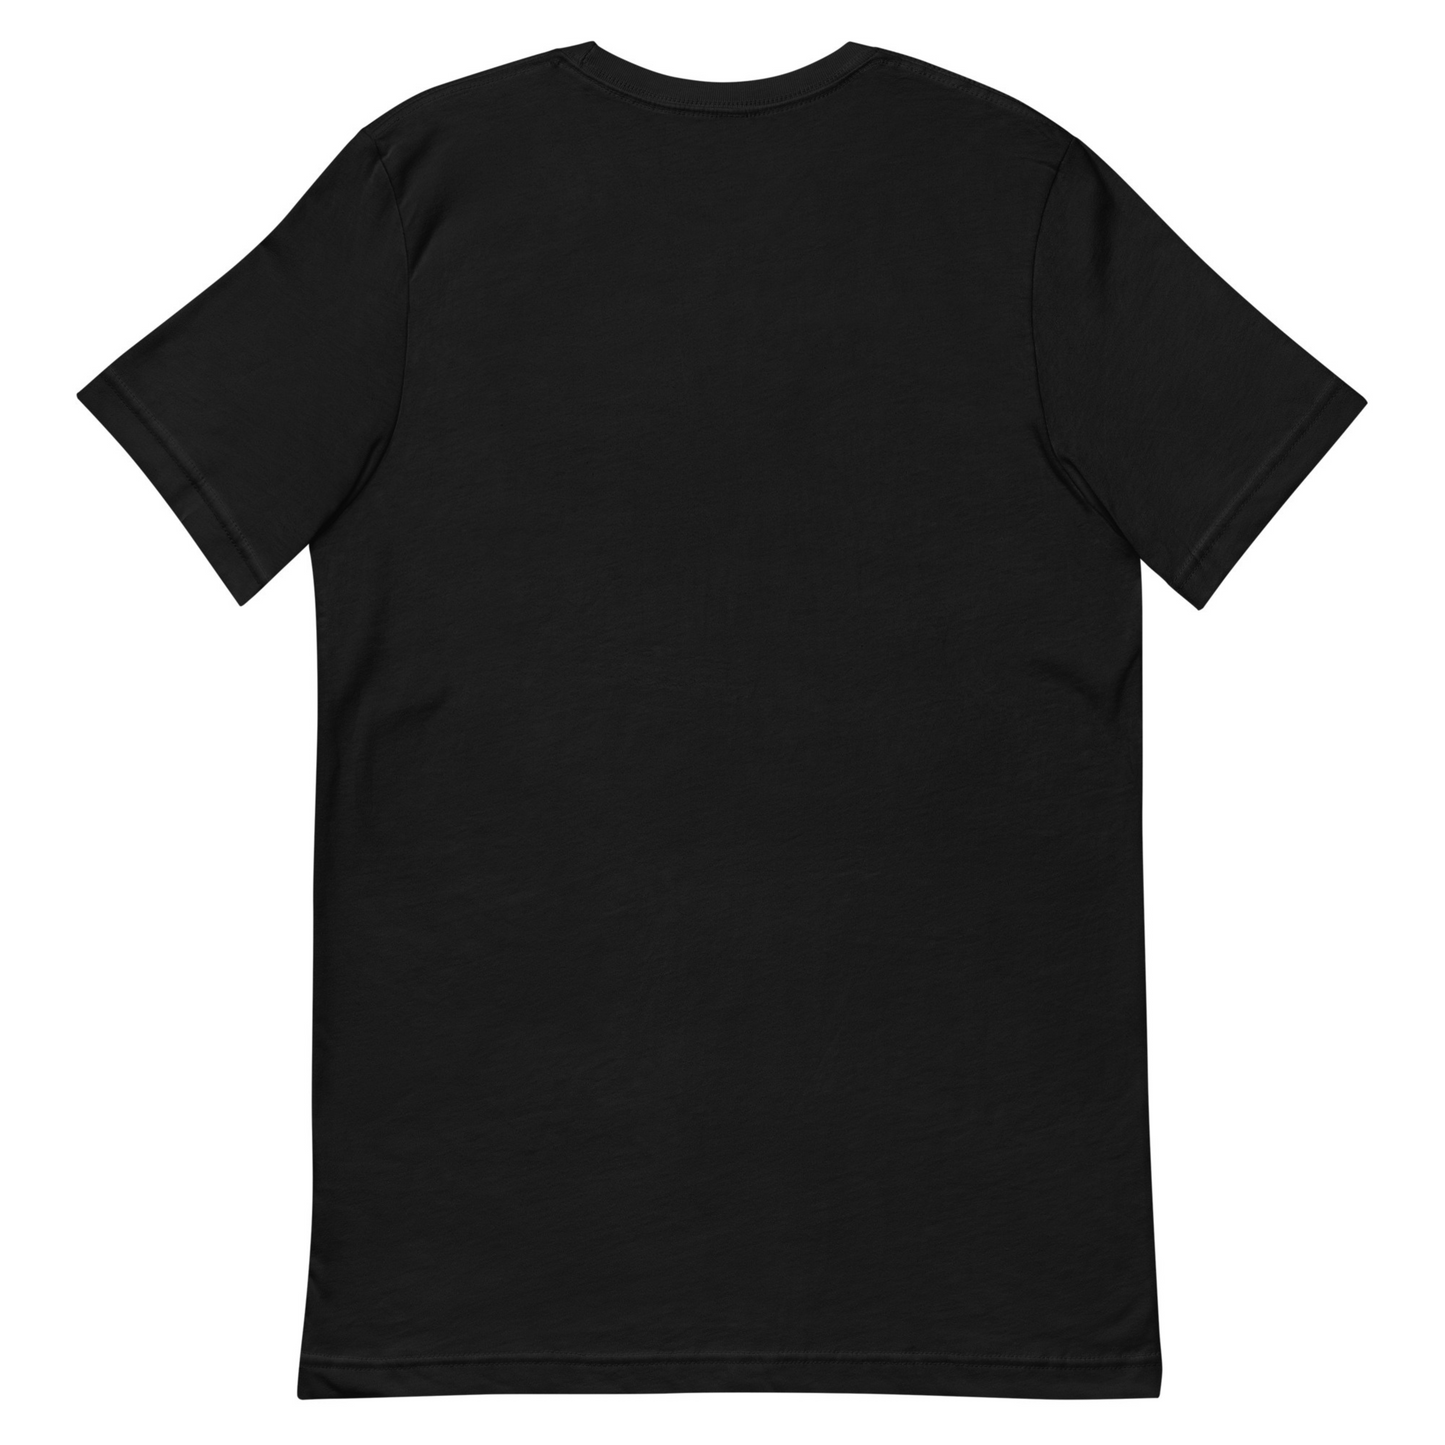 Plain black crew neck t-shirt seen from the back, showcasing a clean and simple design with no graphics or text.